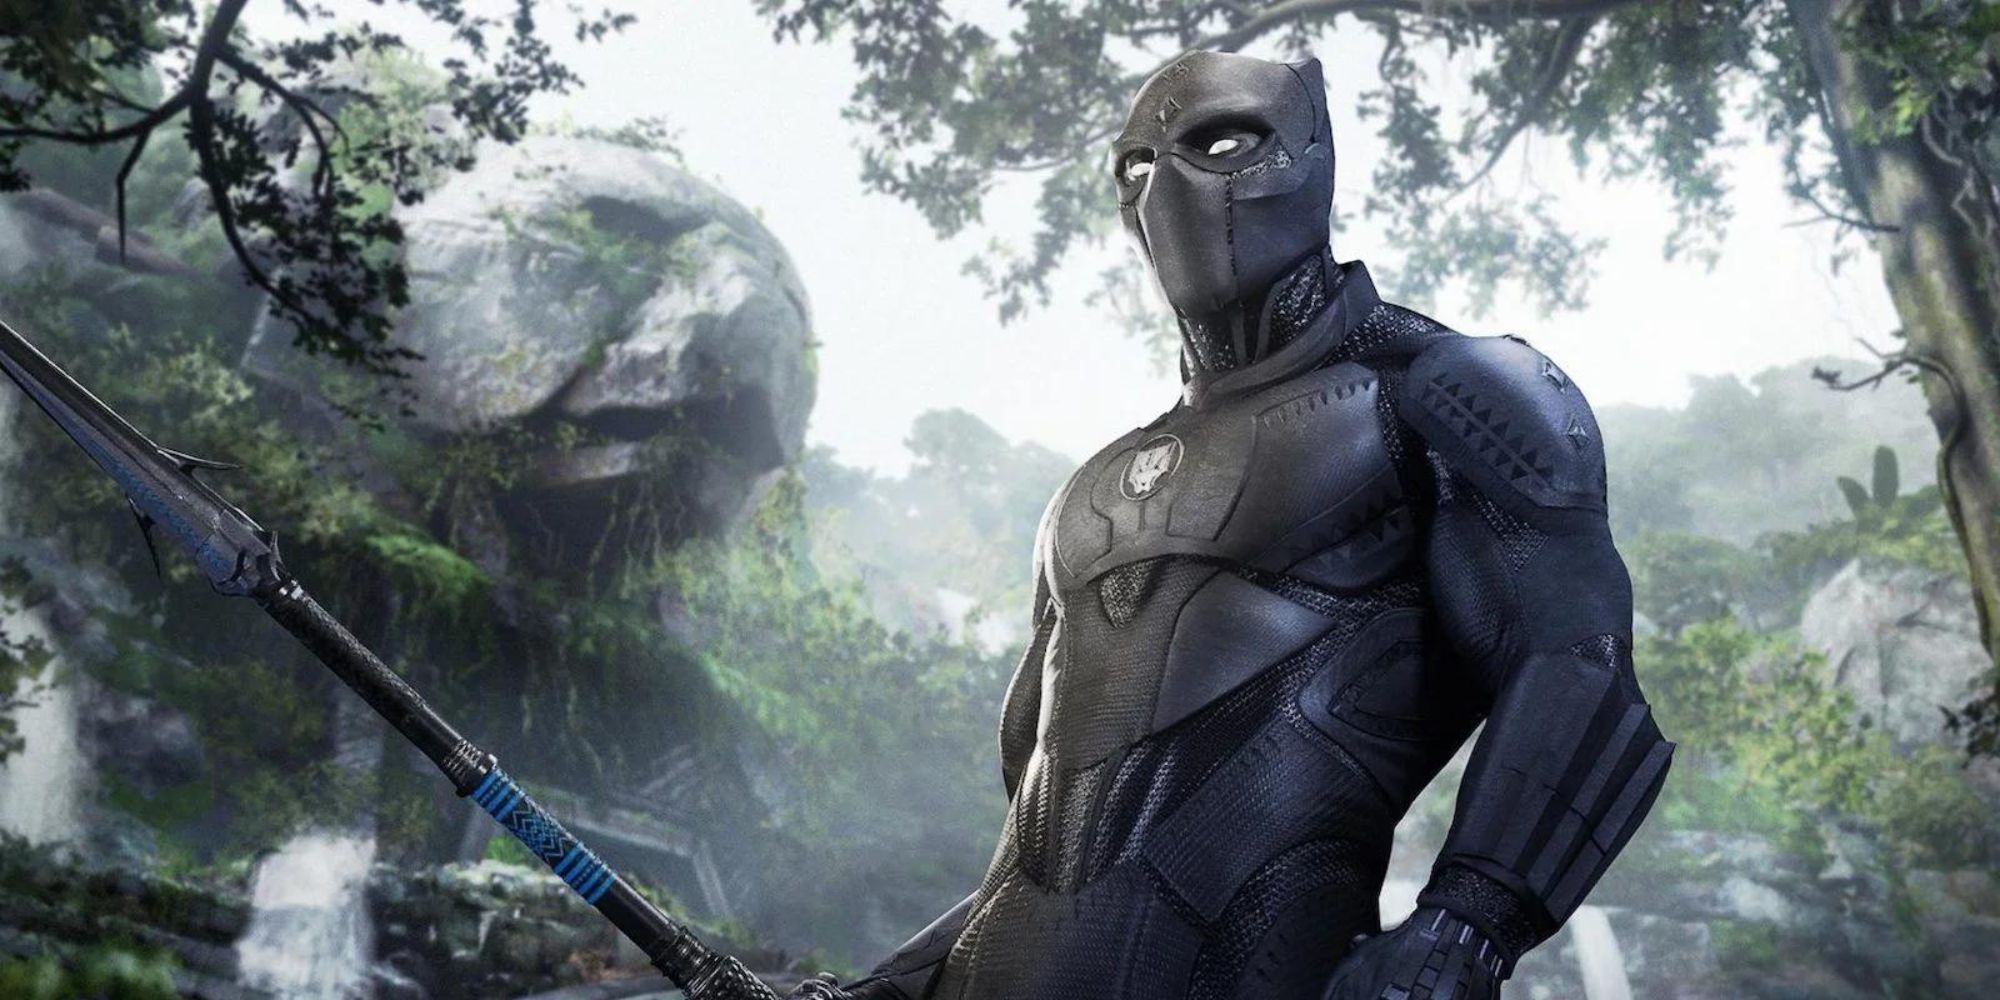 Black Panther holds a spear in a jungle surrounded by waterfalls